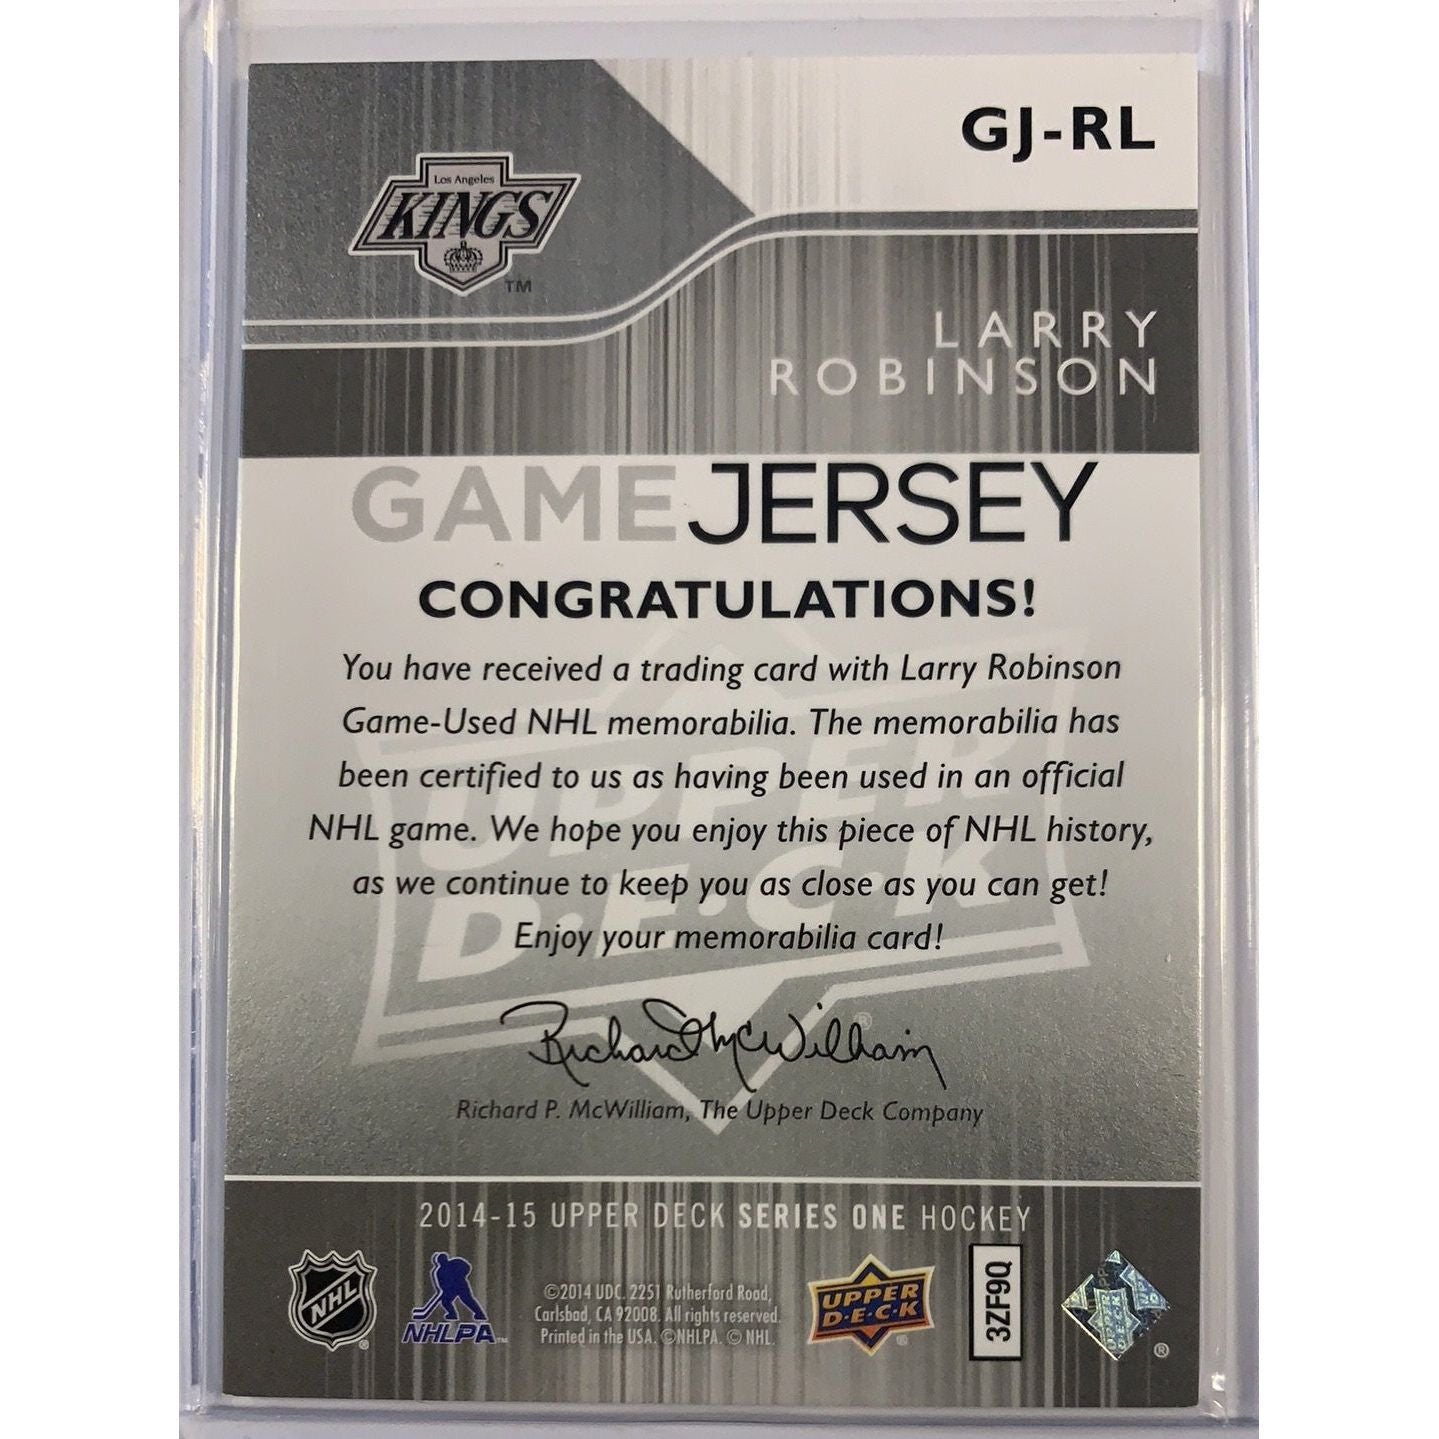  2005-06 Upper Deck Series 1 Larry Robinson Game Jersey  Local Legends Cards & Collectibles